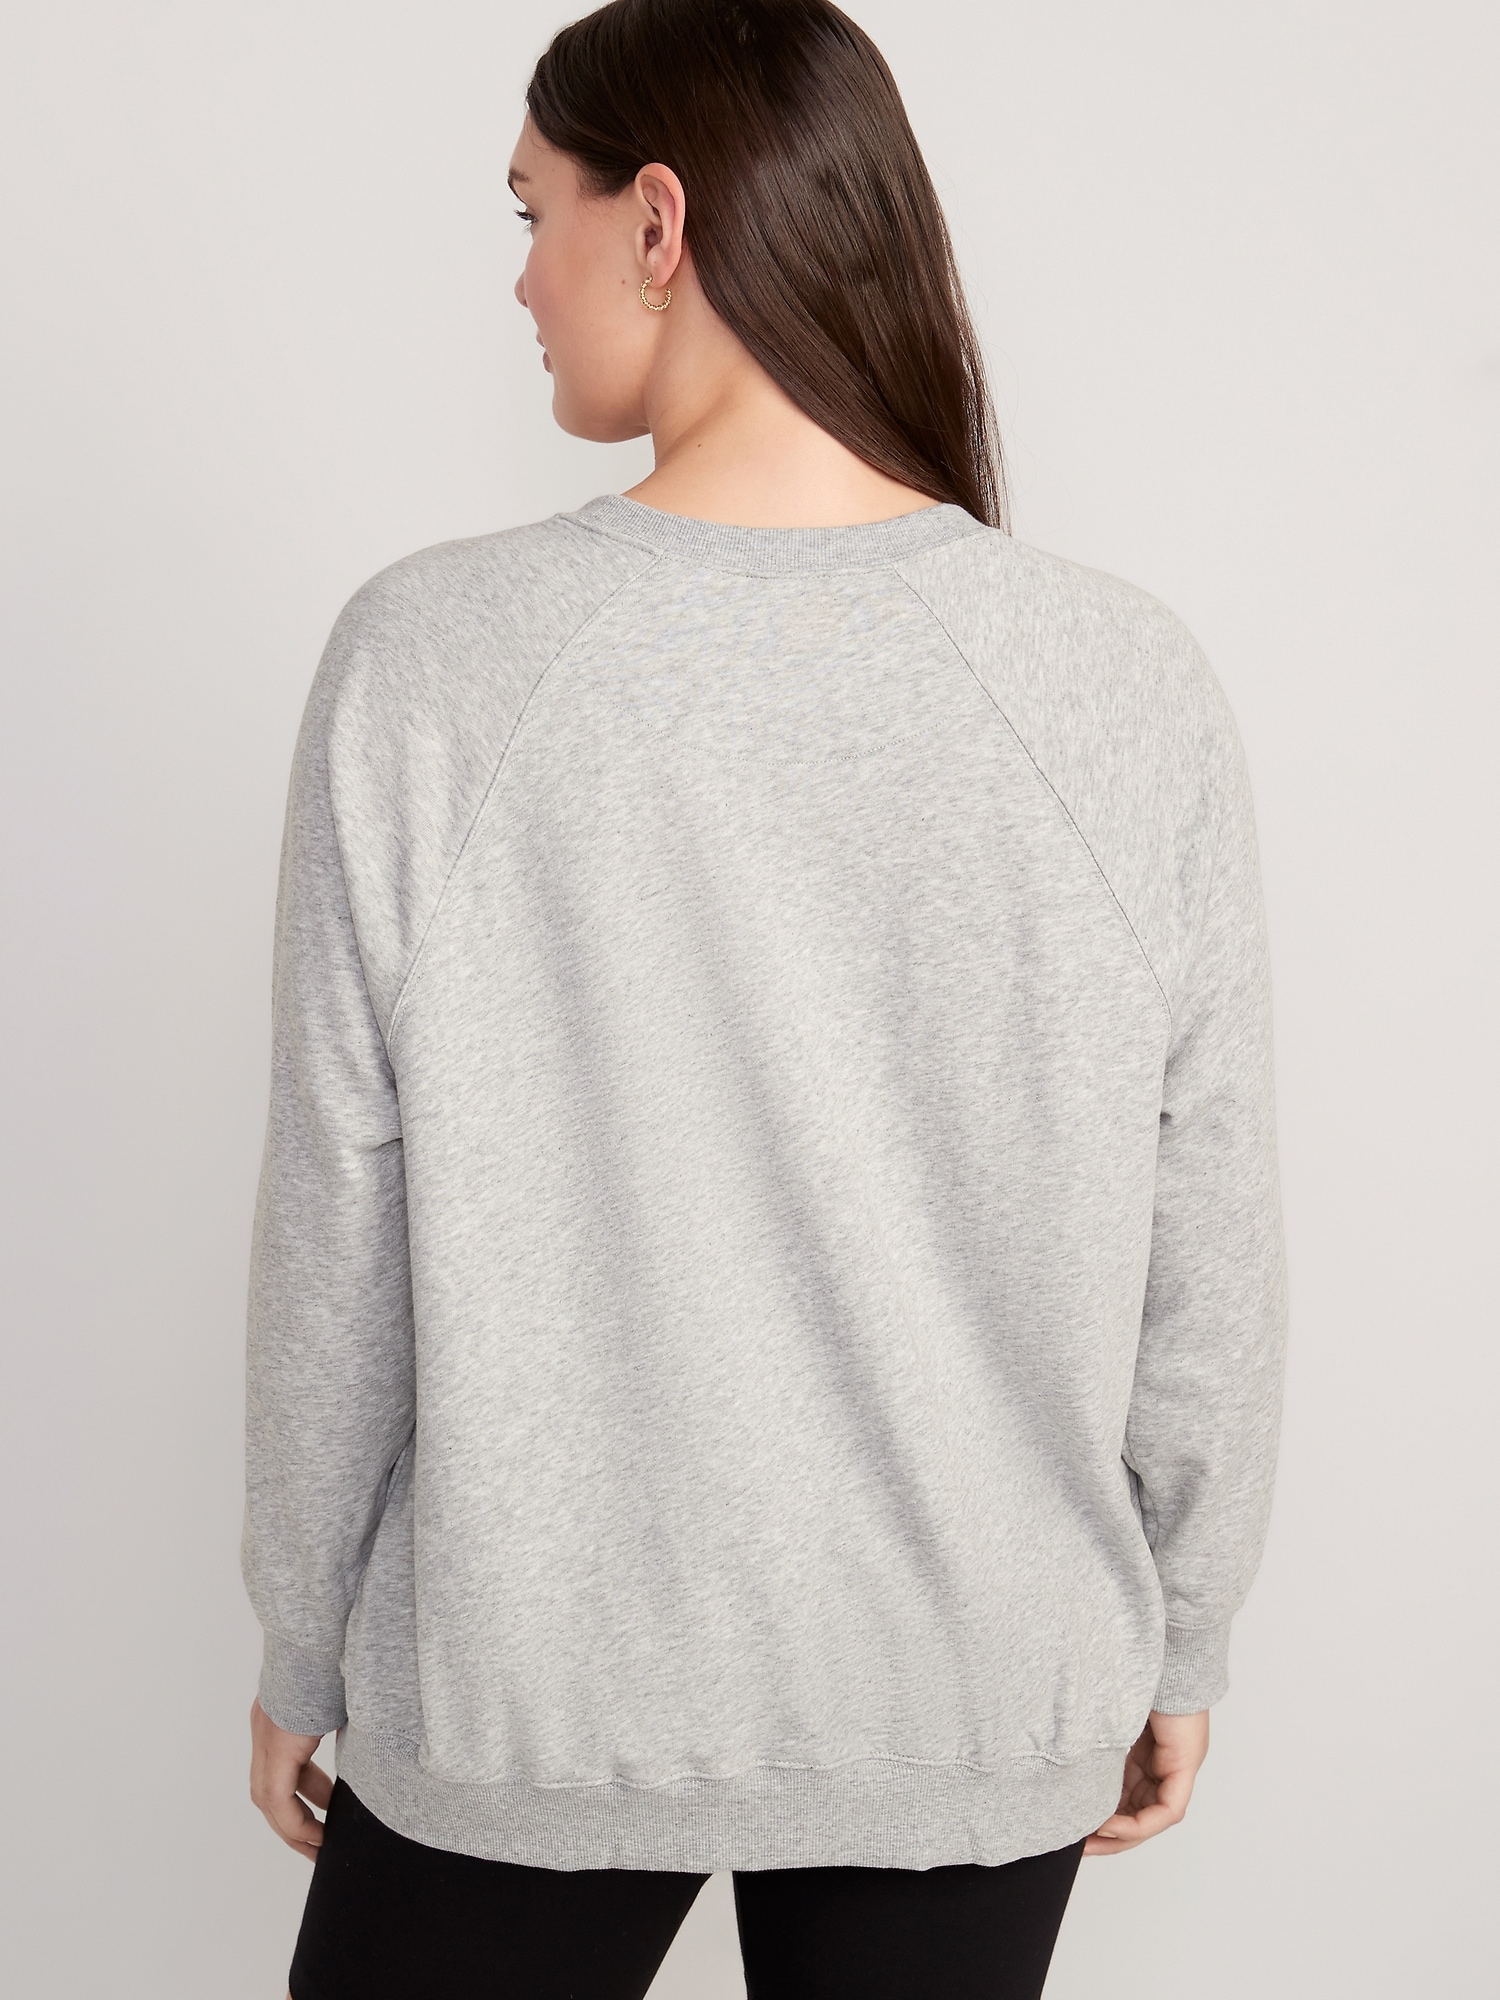 Old Navy for | Terry French Sweatshirt Oversized Tunic Women